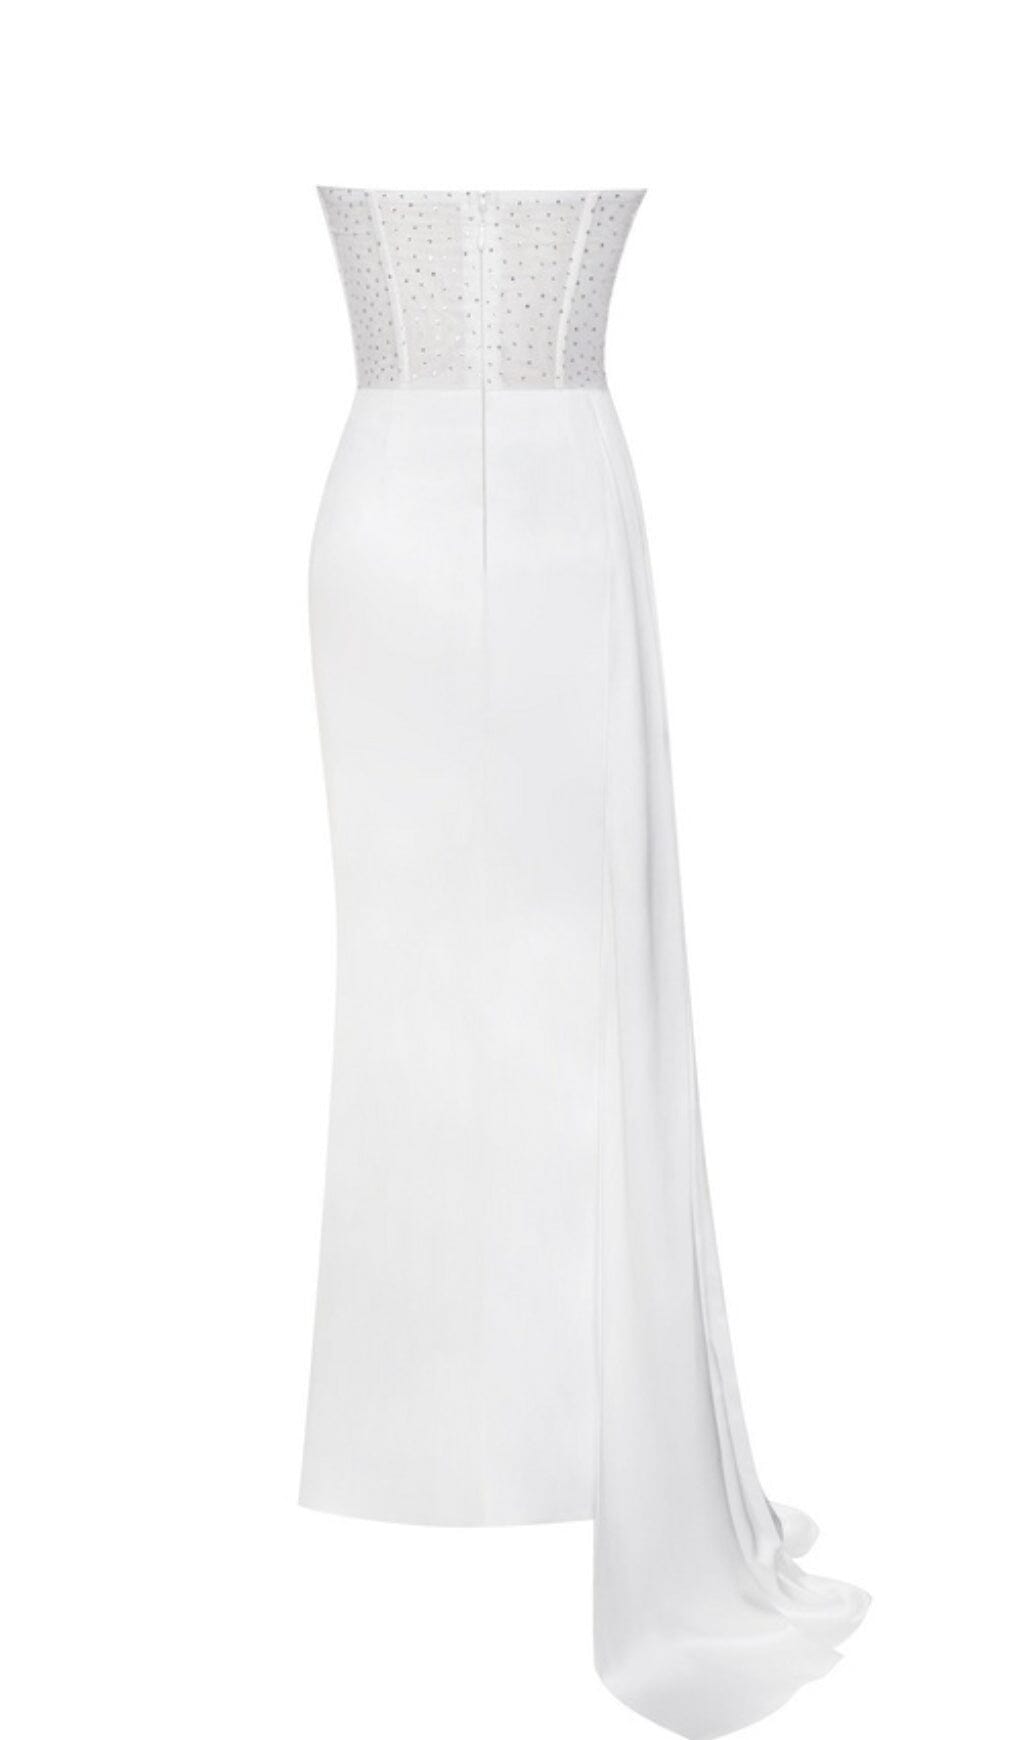 HOLLY WHITE CRYSTALLIZED CORSET HIGH SLIT SATIN GOWN